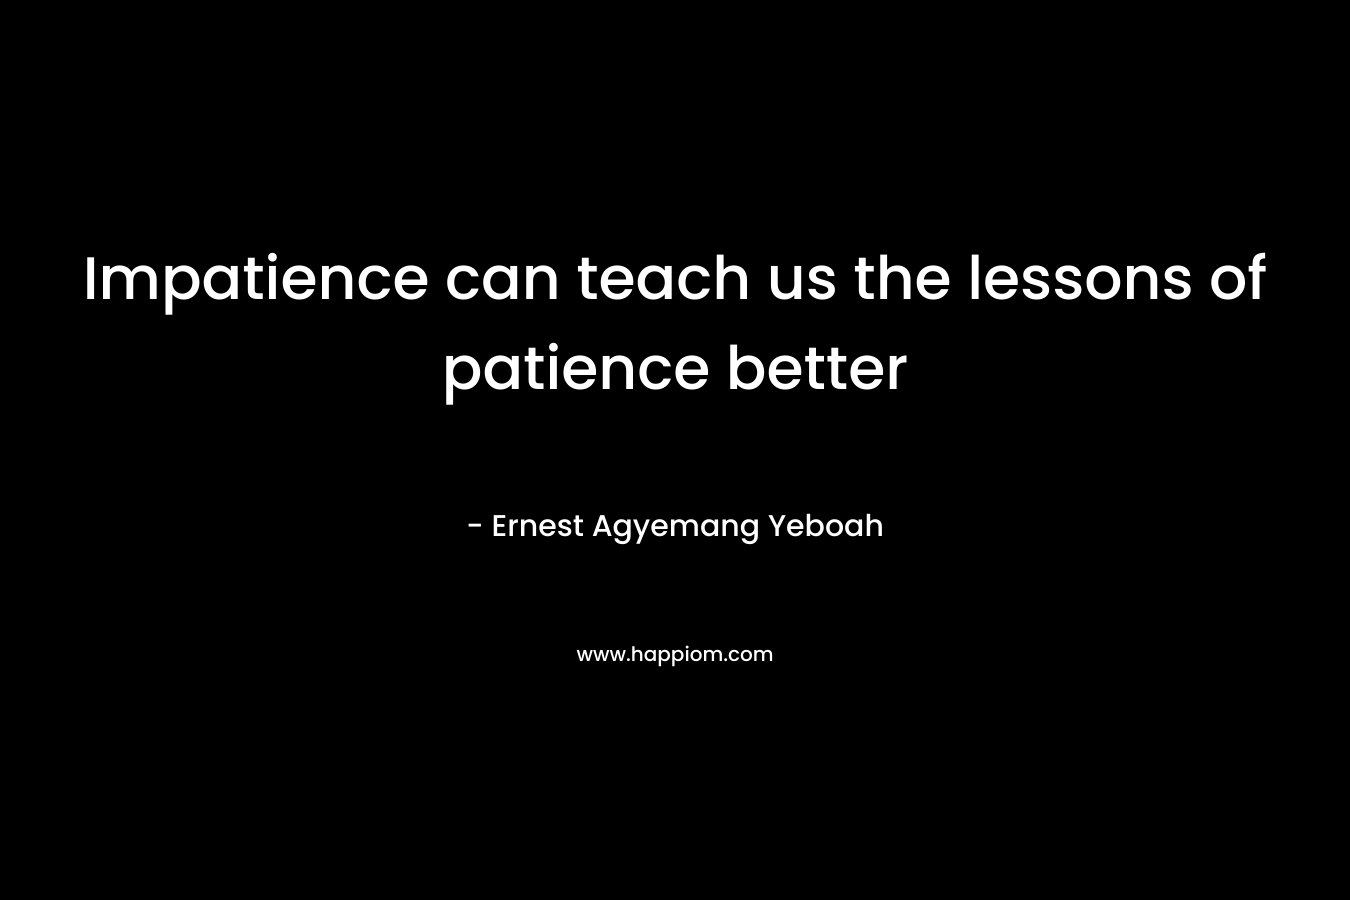 Impatience can teach us the lessons of patience better